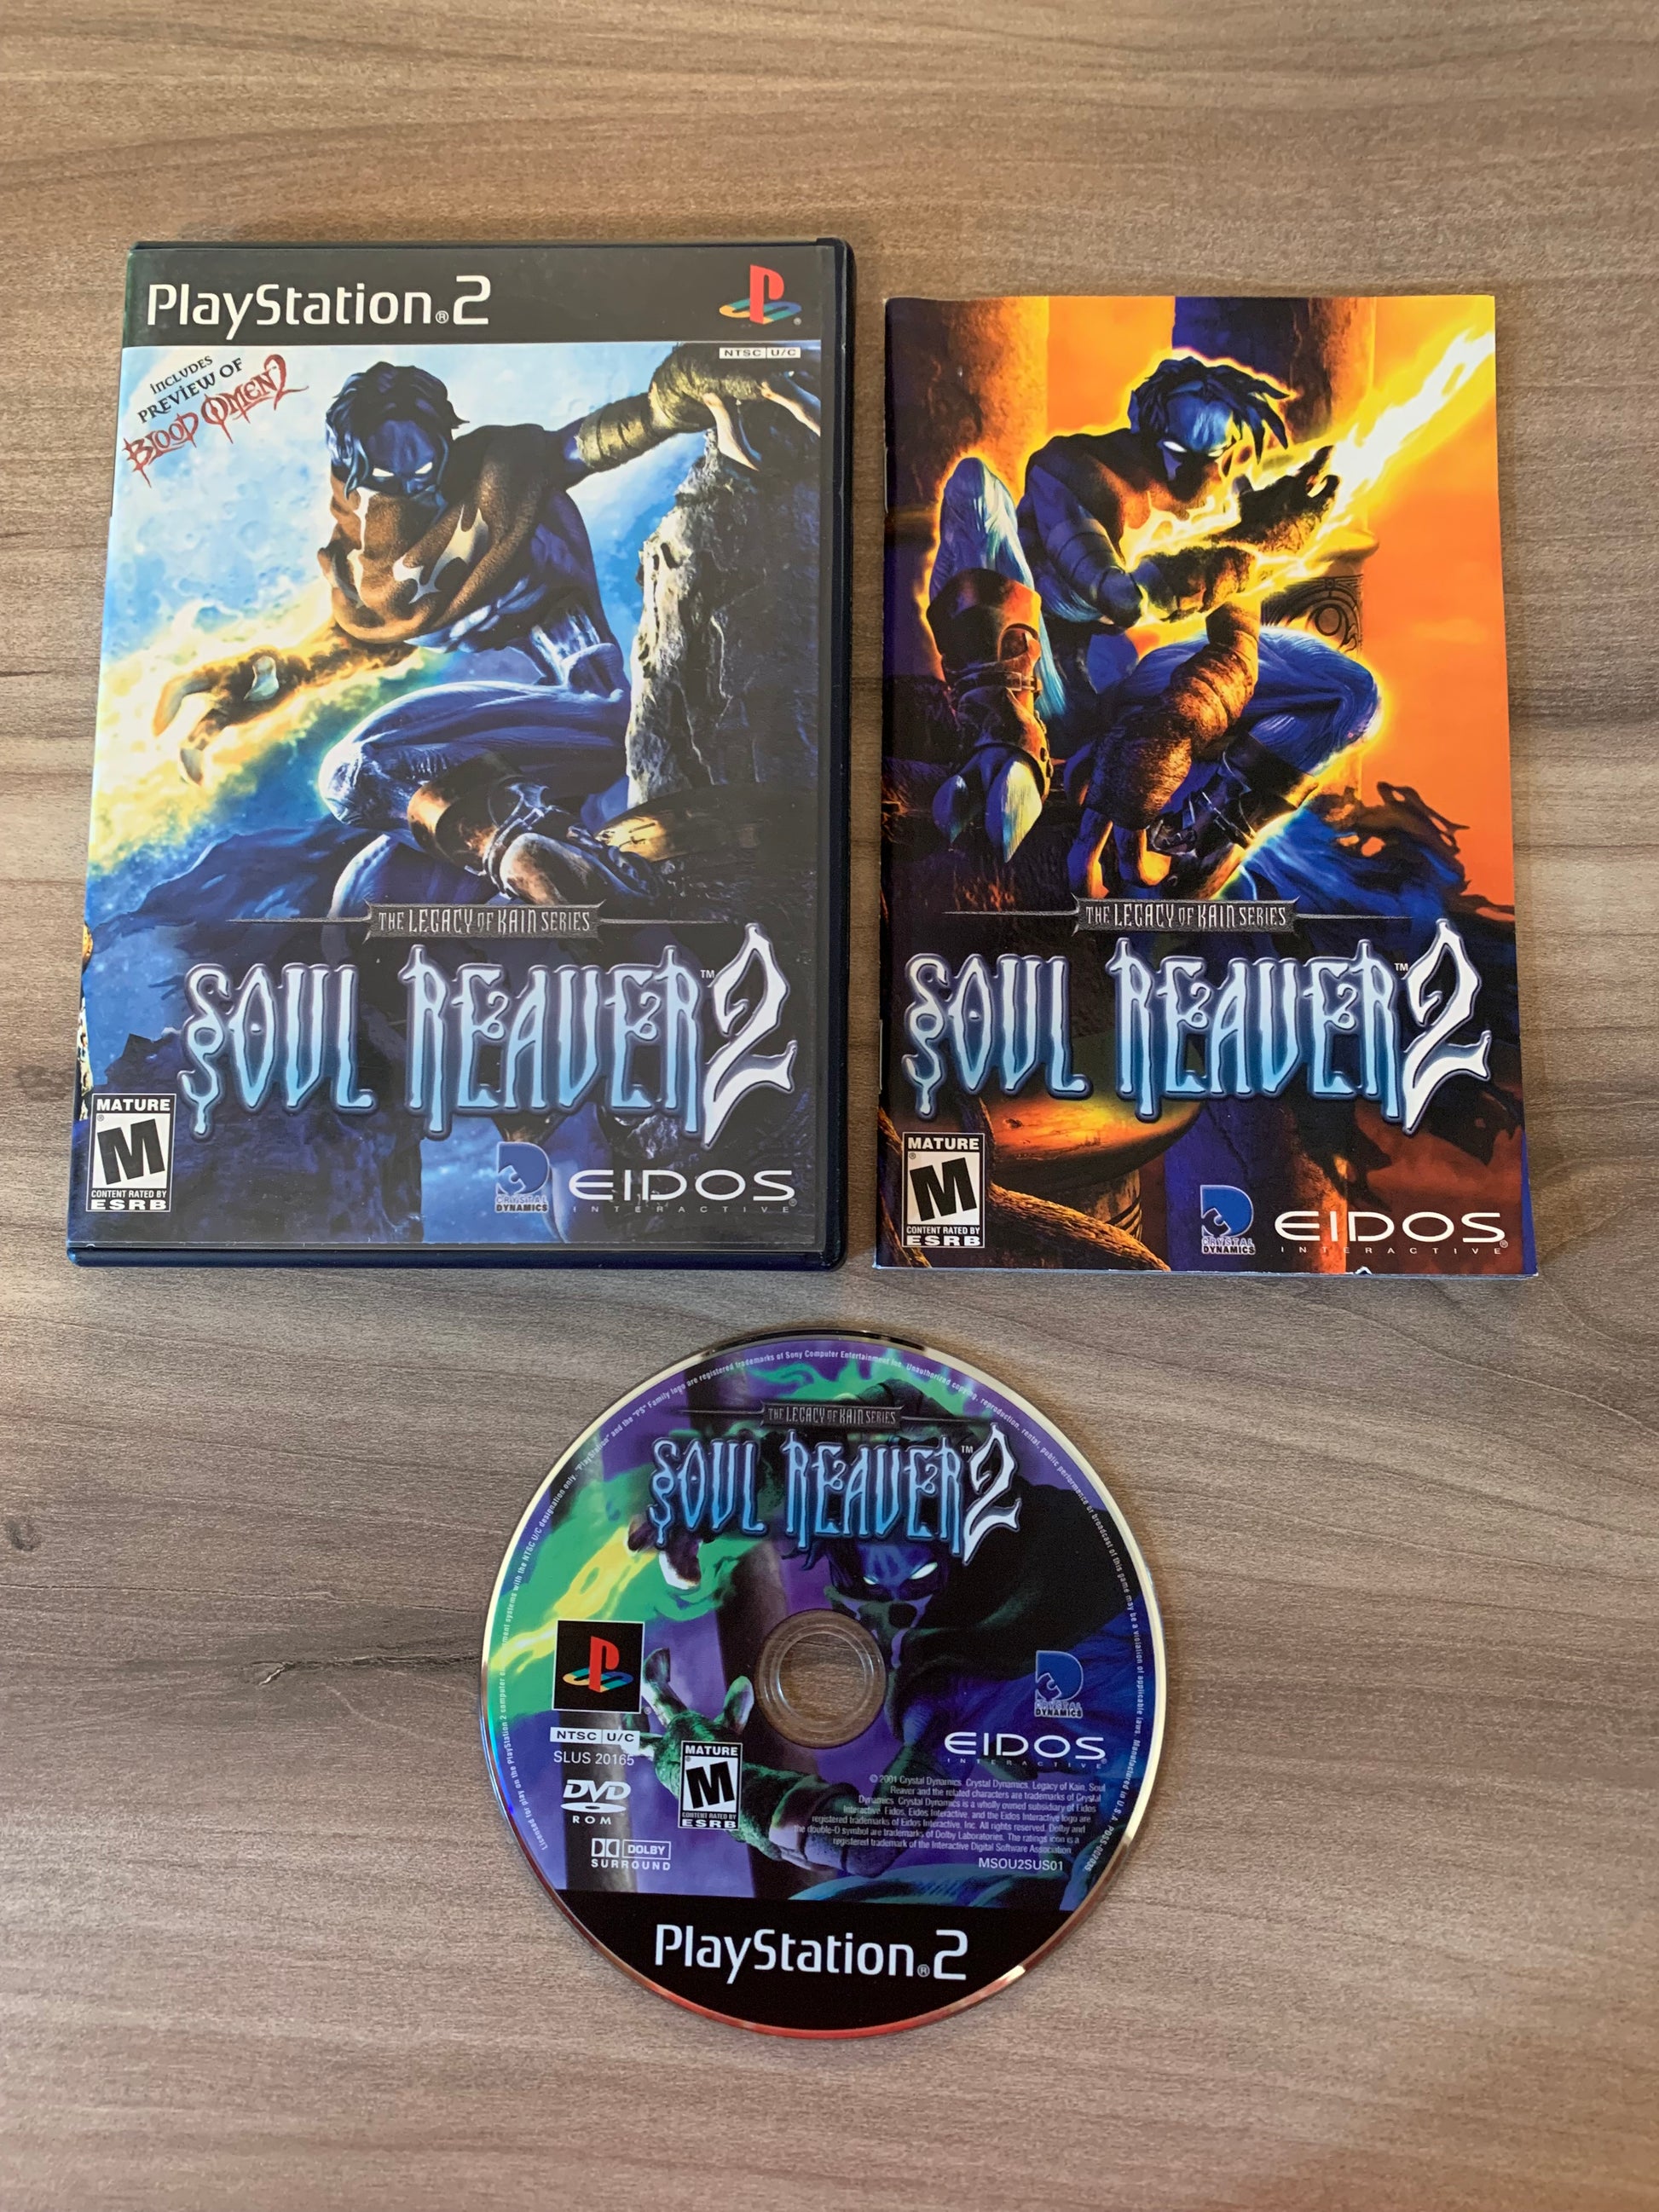 PiXEL-RETRO.COM : SONY PLAYSTATION 2 (PS2) COMPLET CIB BOX MANUAL GAME NTSC THE LEGACY OF KAIN SERIES SOUL REAVER 2